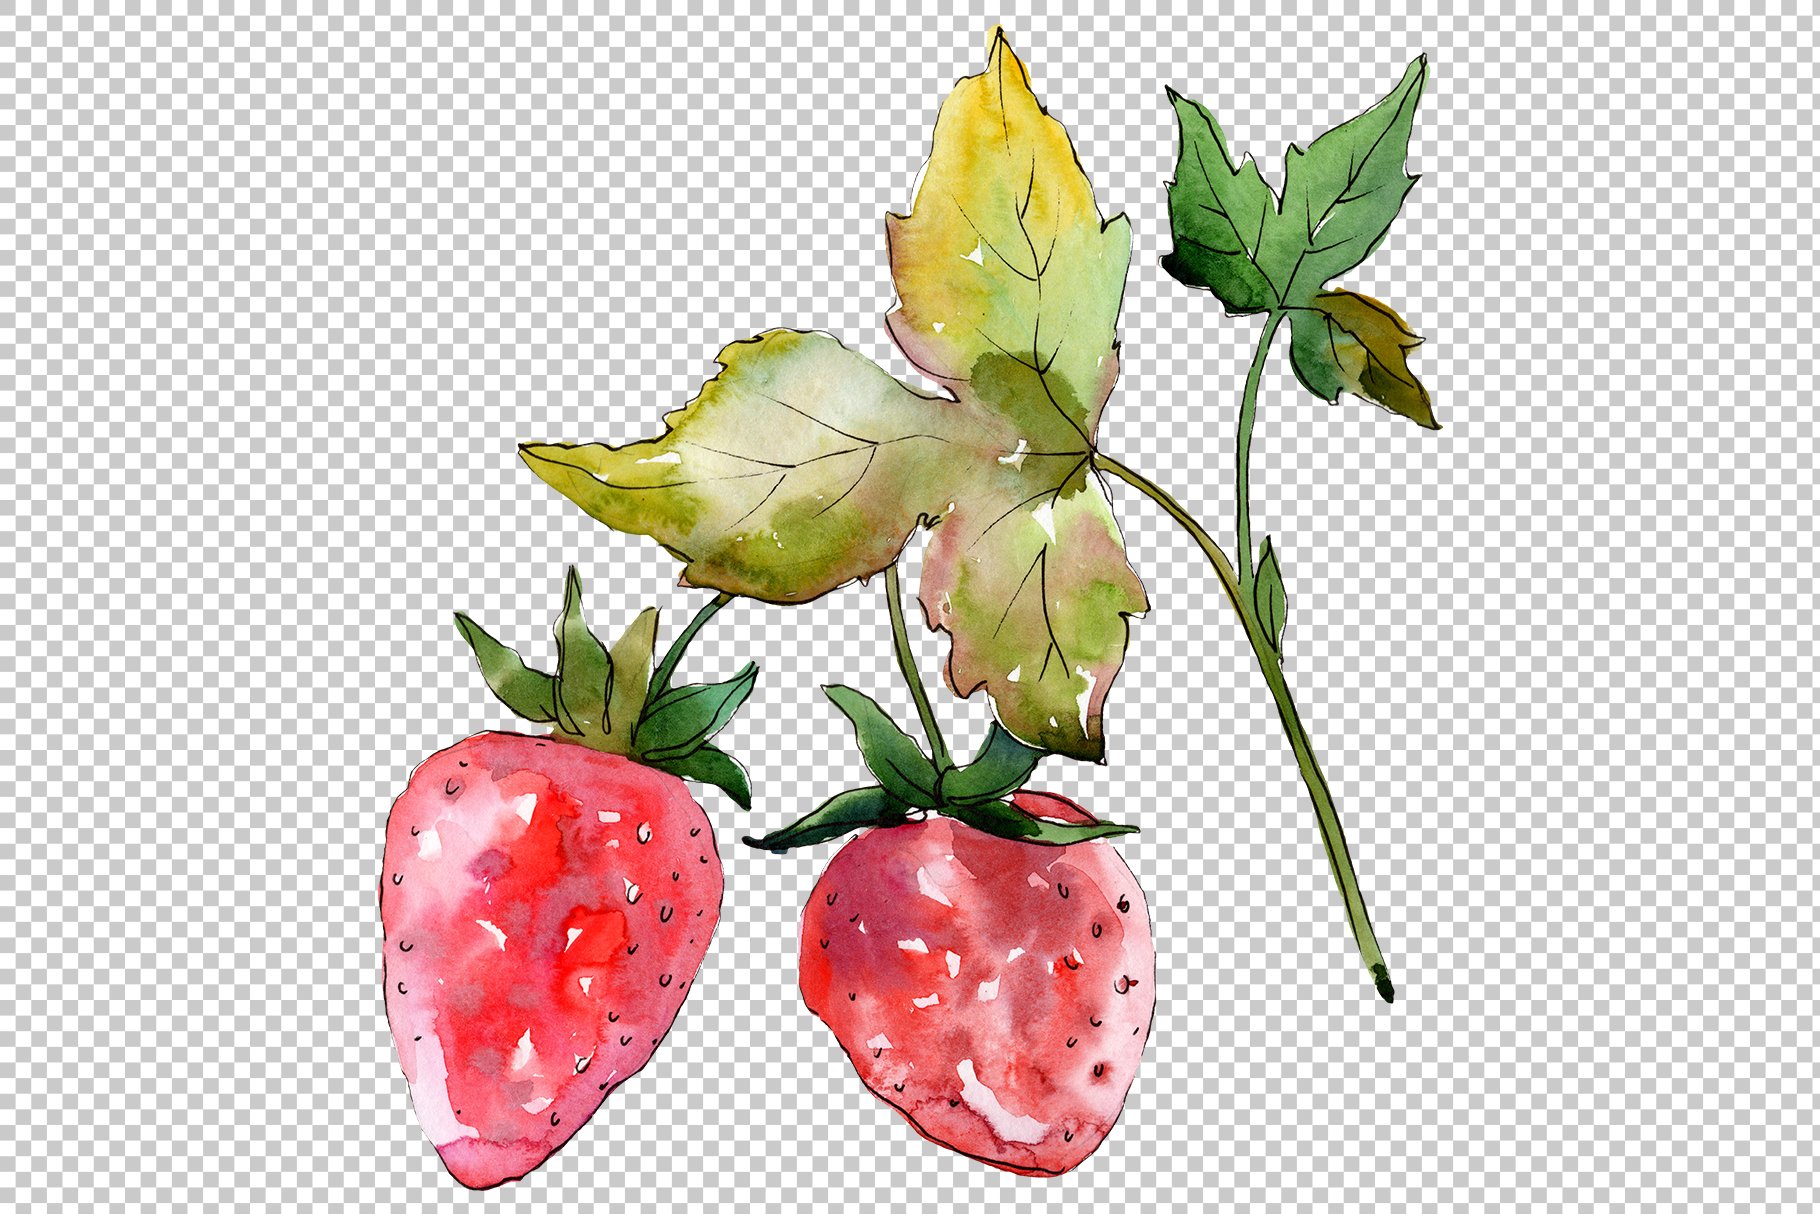 Two watercolor strawberries with the leaves.